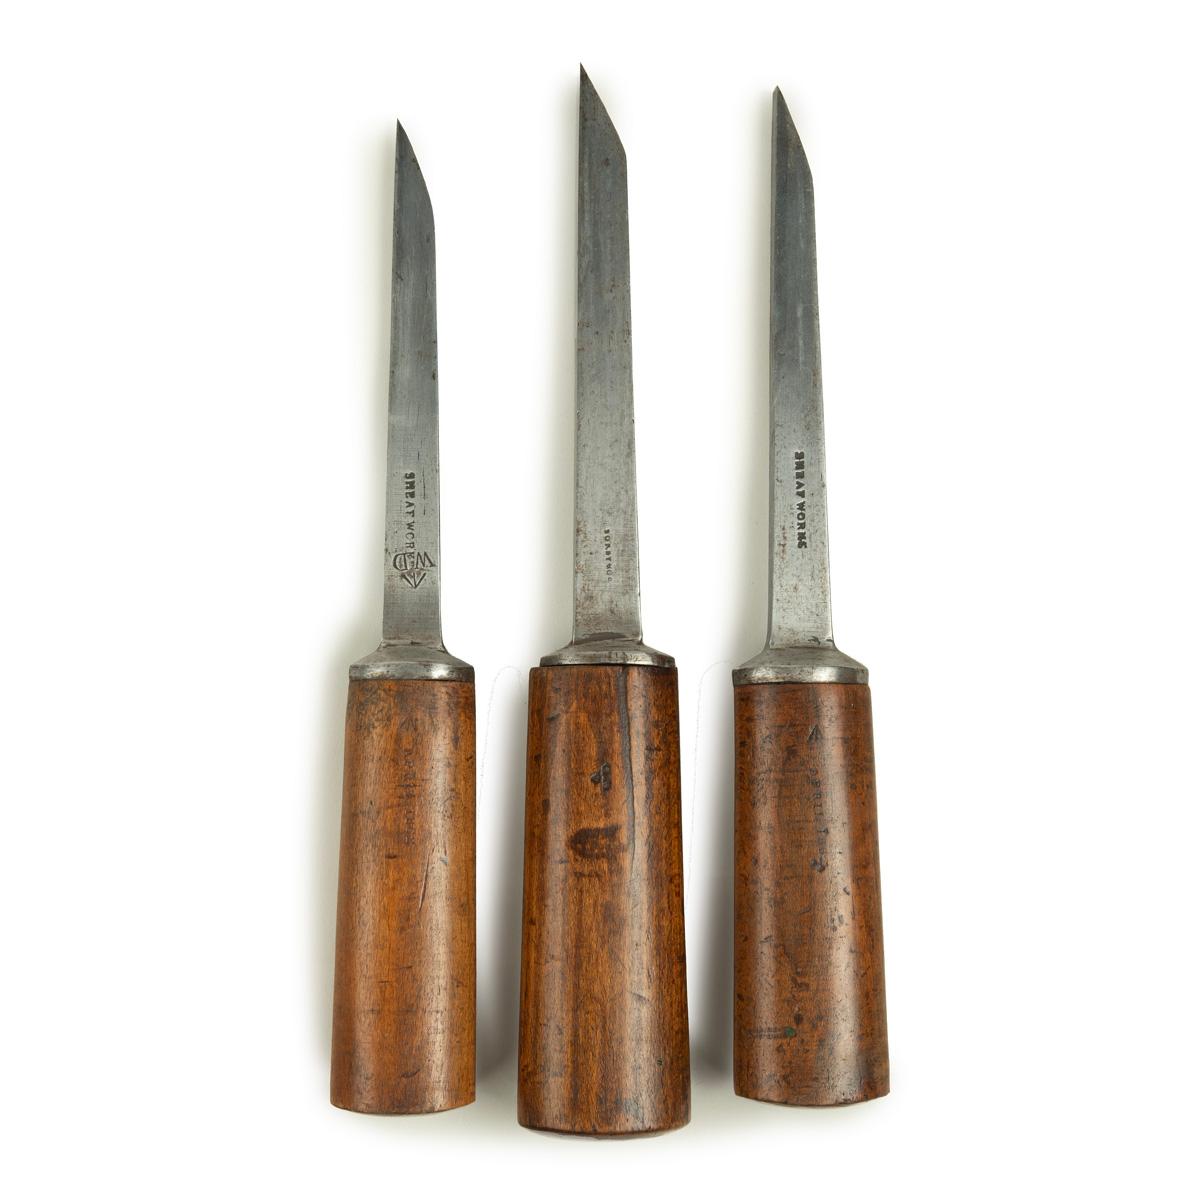 Three mortice chisels, all with sturdy ash handles by Sorby & Co with steel blades, two stamped T. Turton & Sons, another by Sorby & Co, one also stamped Sheaf Works and all bearing the initial W.D for the War Department, dated 1862.